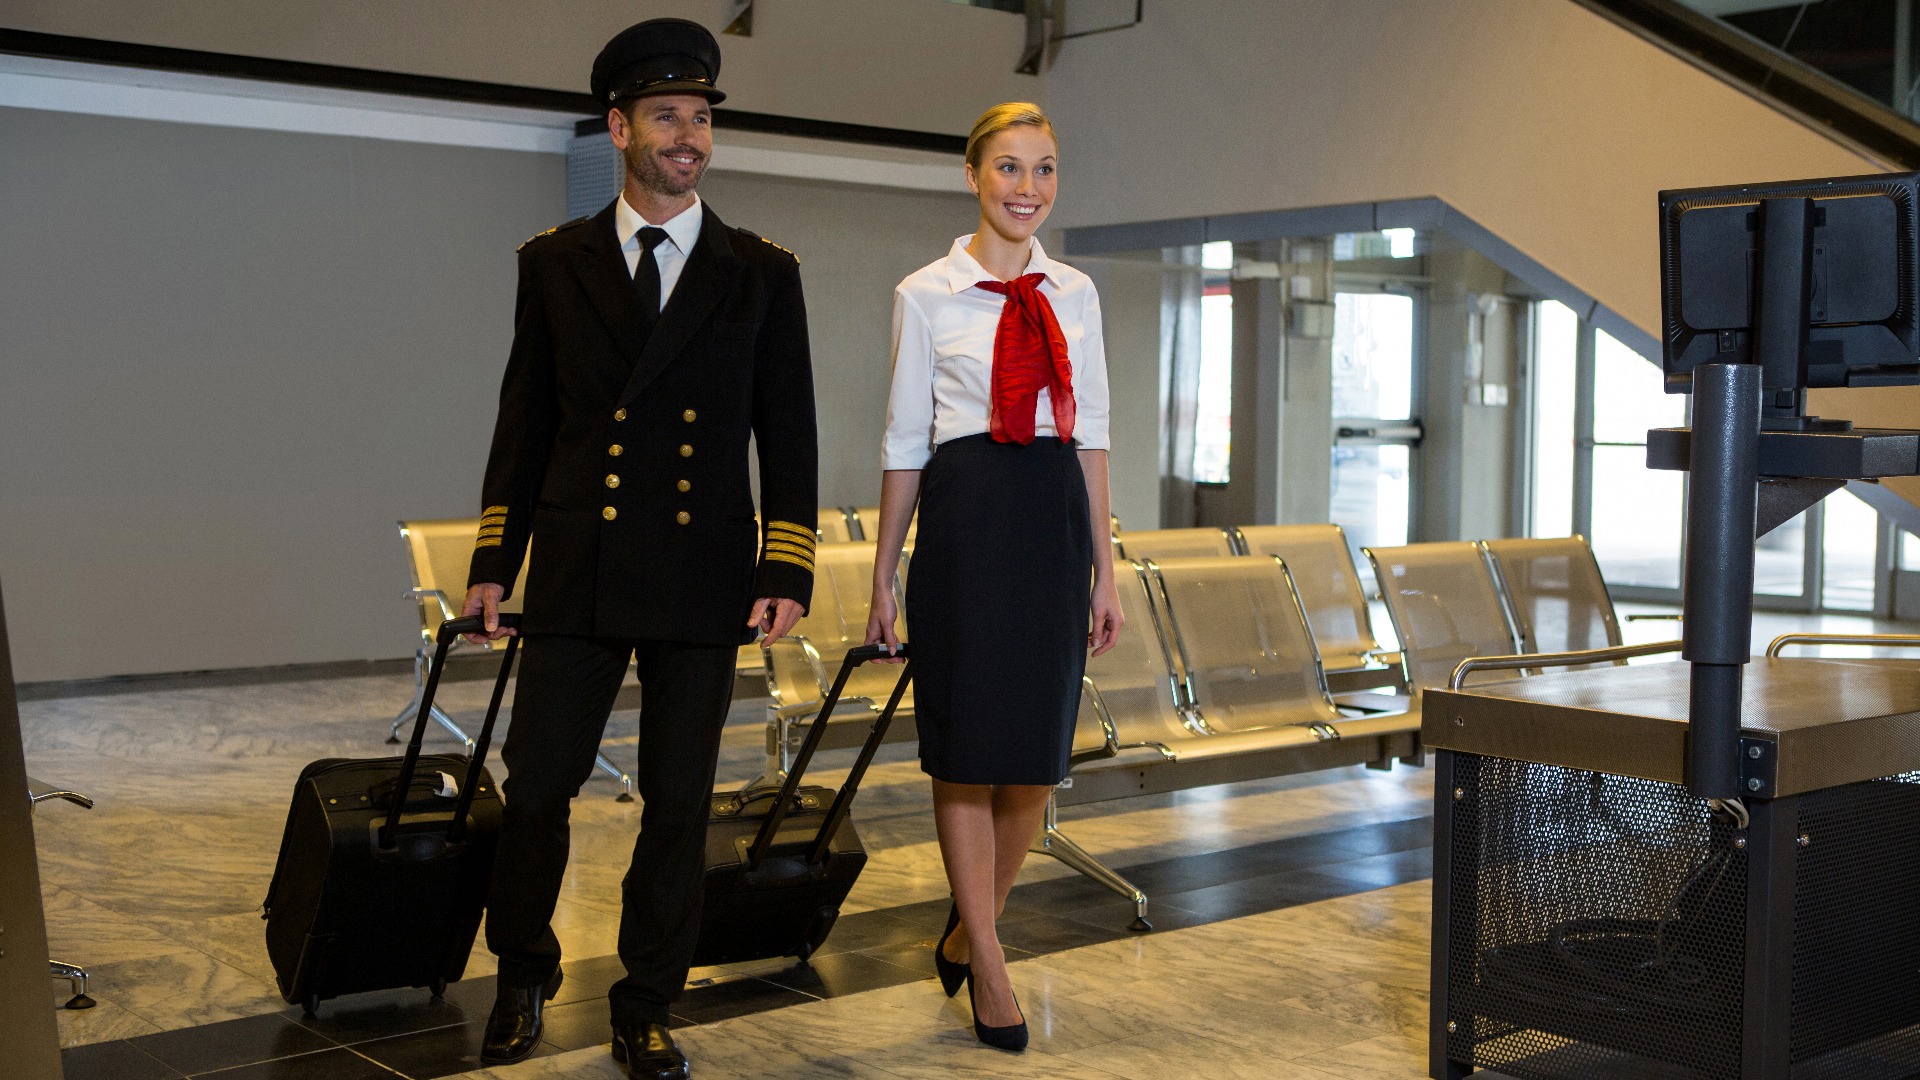 International Flight Attendant Day: What Is It & Why Does It Matter?